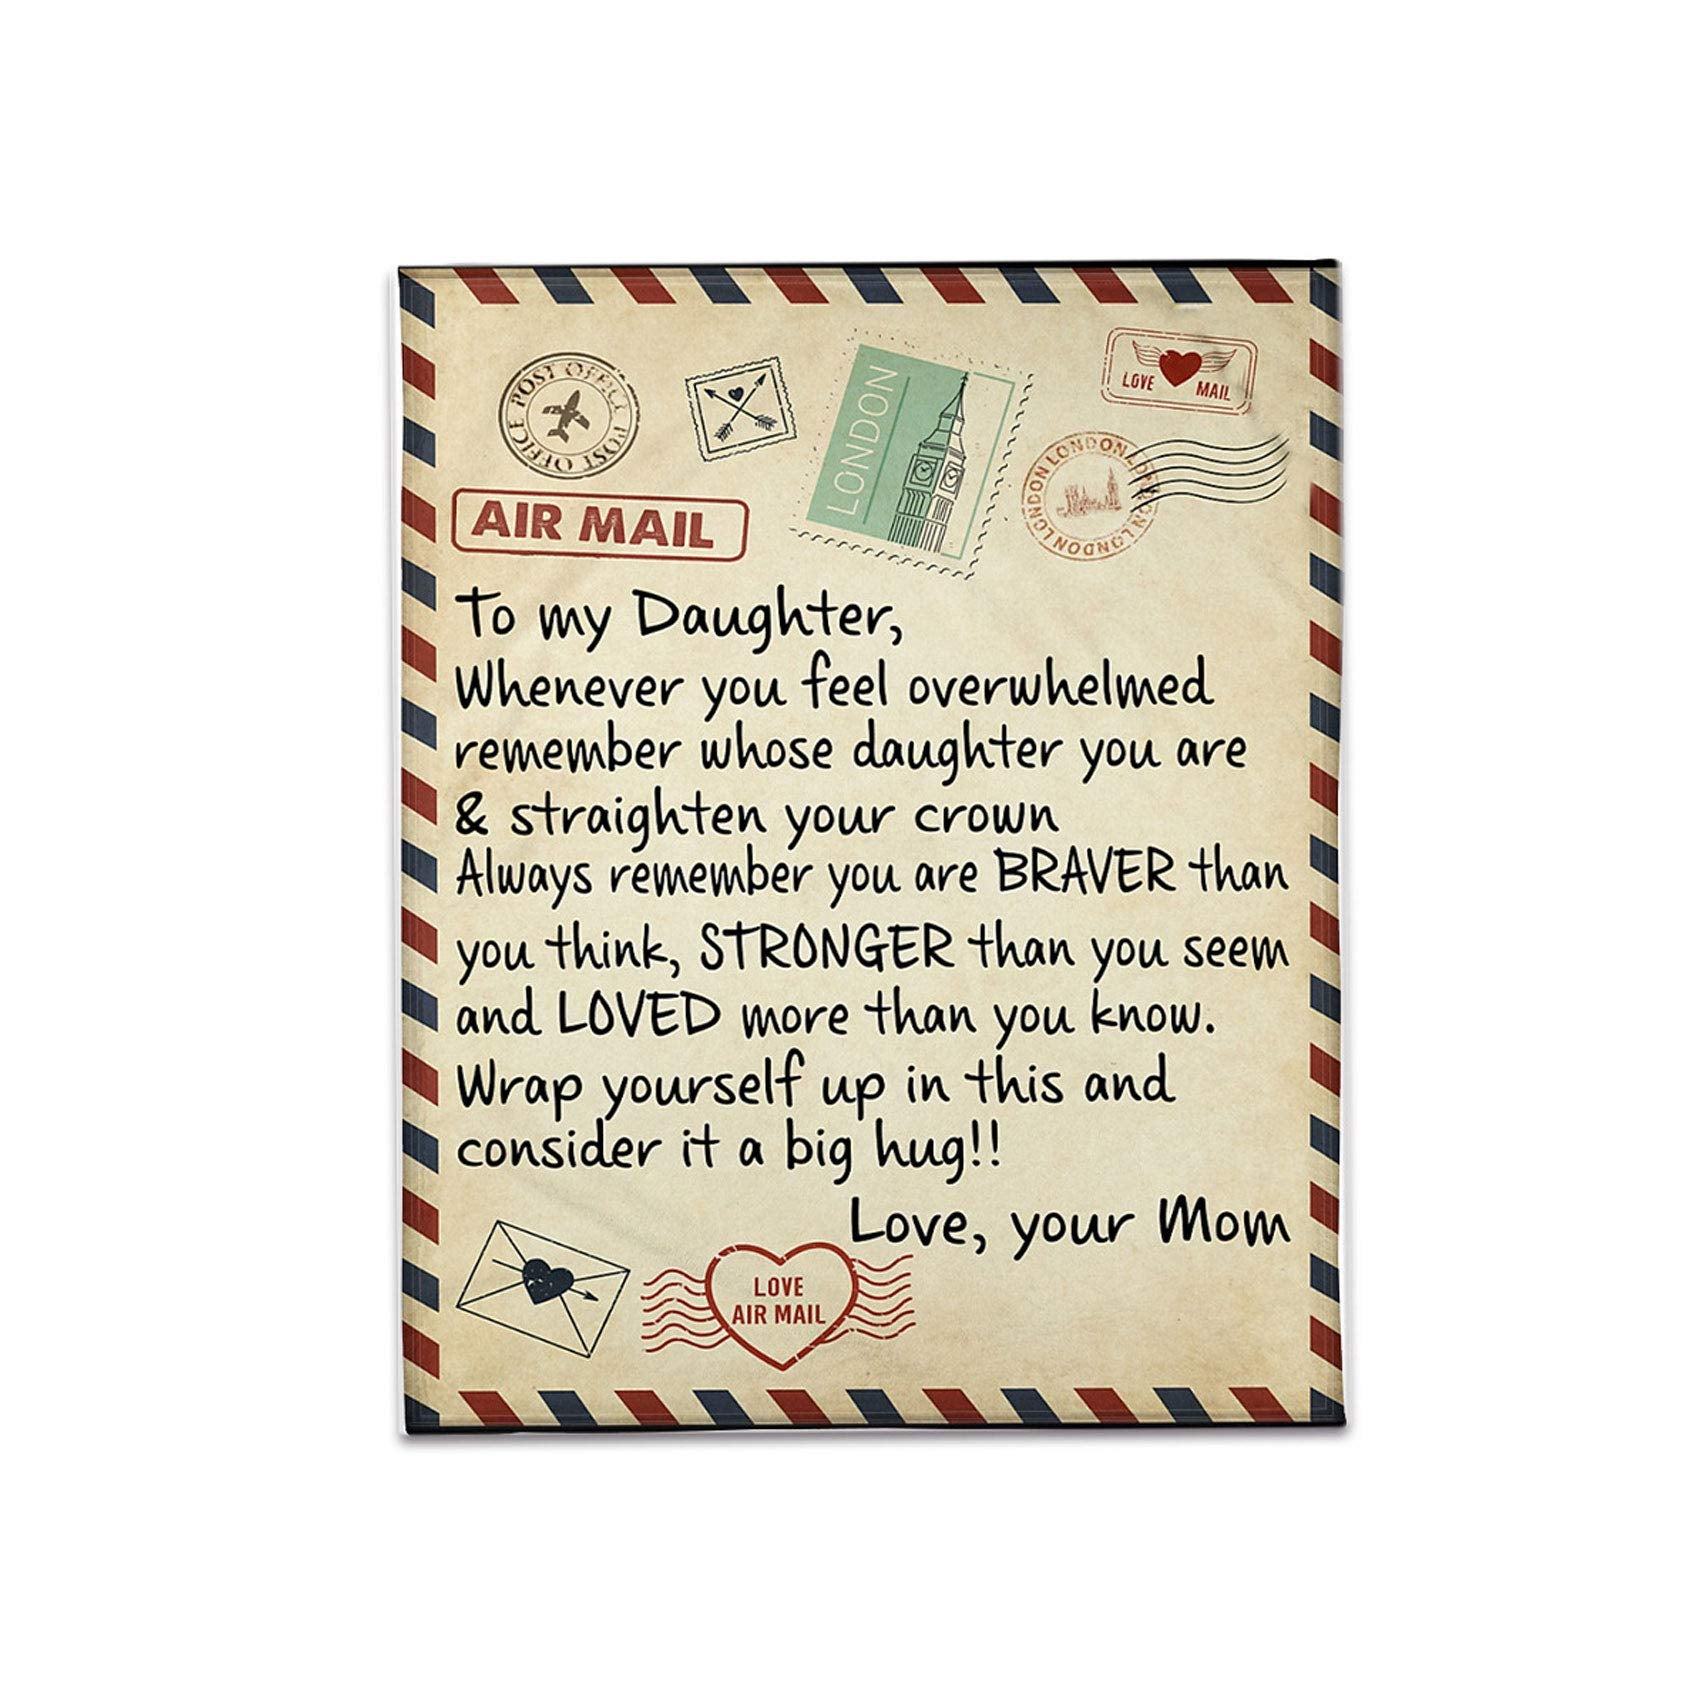 BestTas Fleece Blanket to My Daughter, Personalized Message Letter Blanket, Air Mail Blanket Quilts, Encourage and Love Flannel Blanket Gifts (40x60 in, To Daugter from Mom)